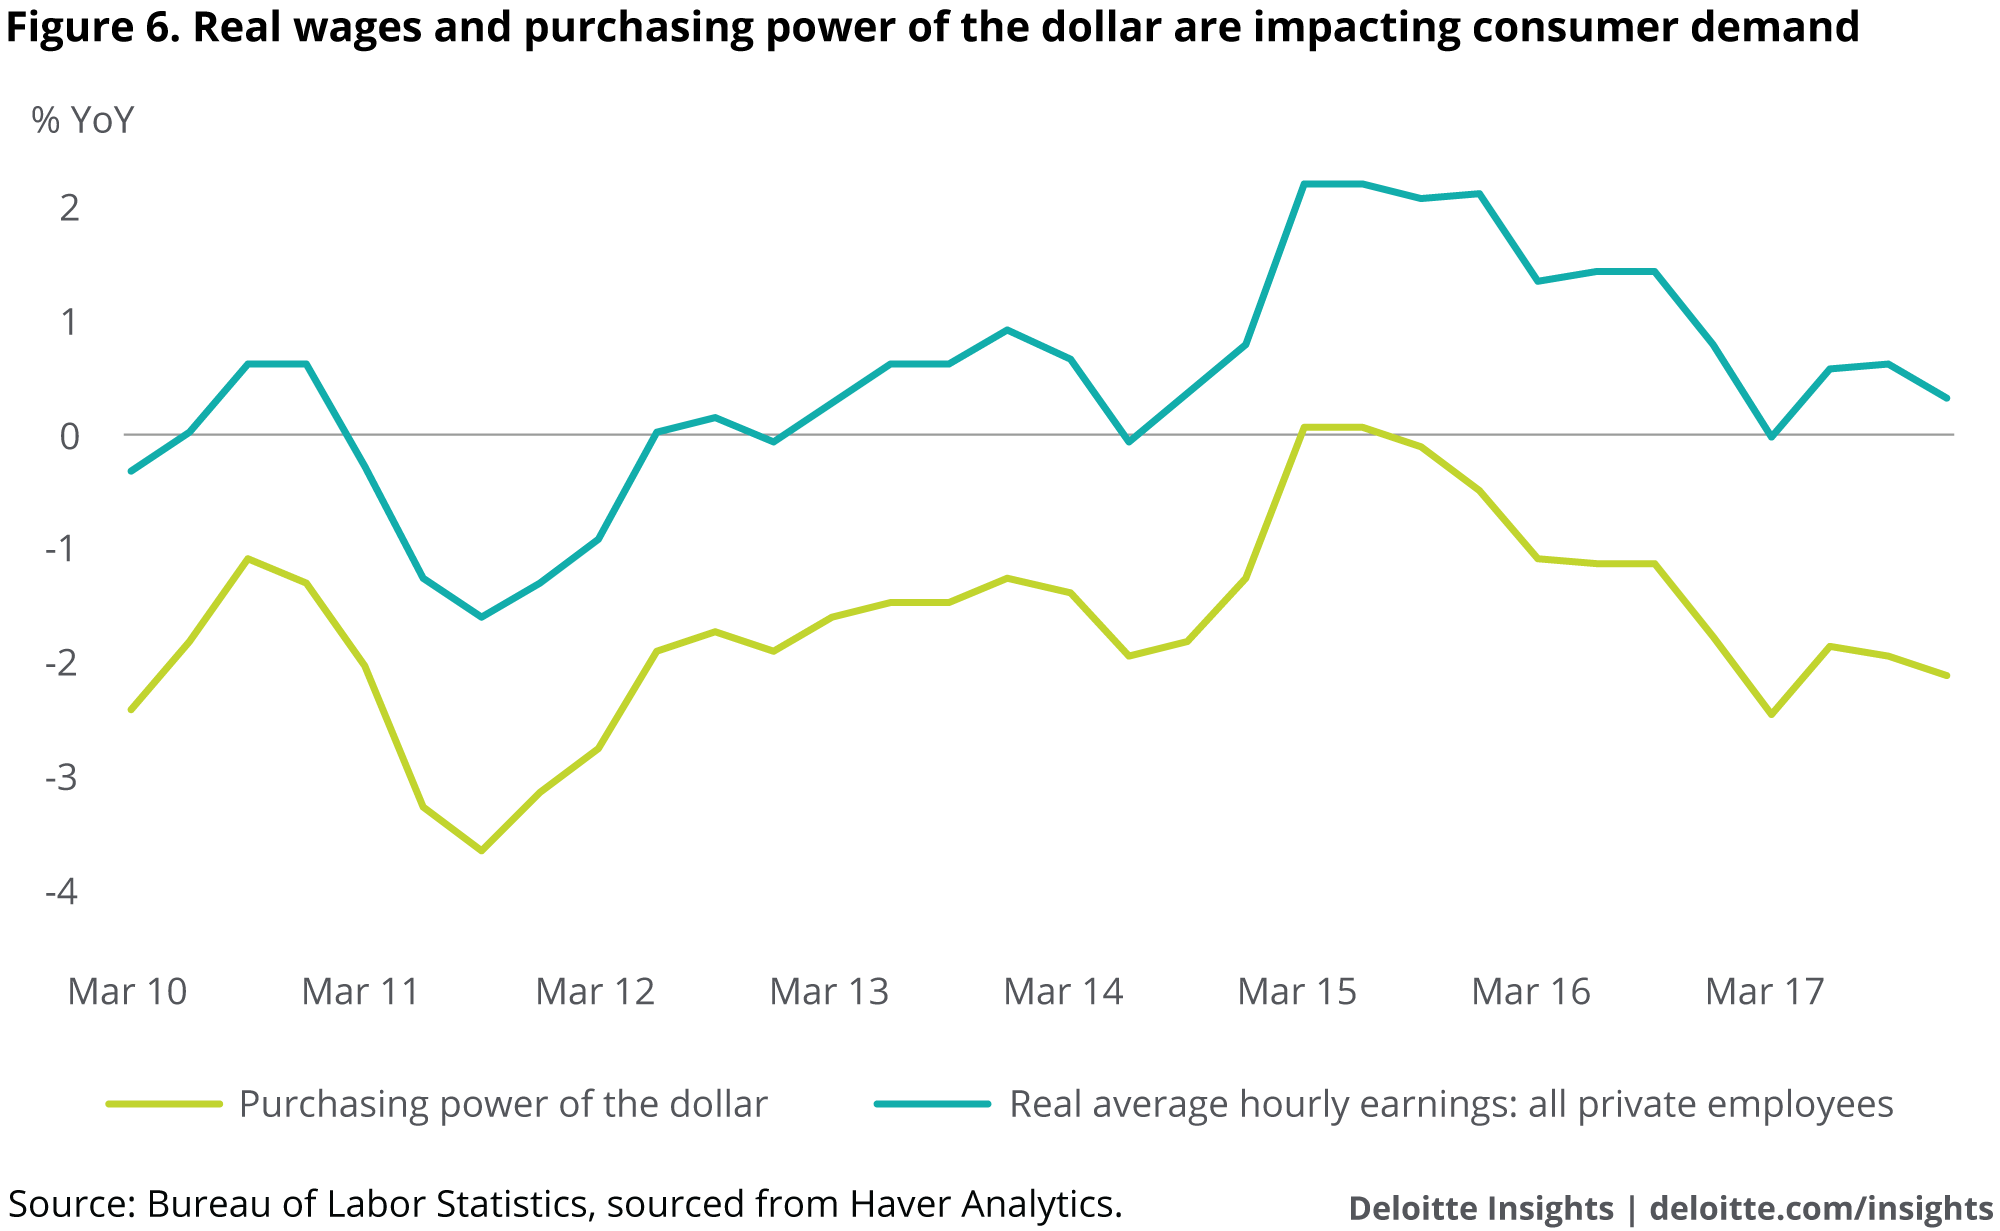 Real wages and purchasing power of the dollar are impacting consumer demand